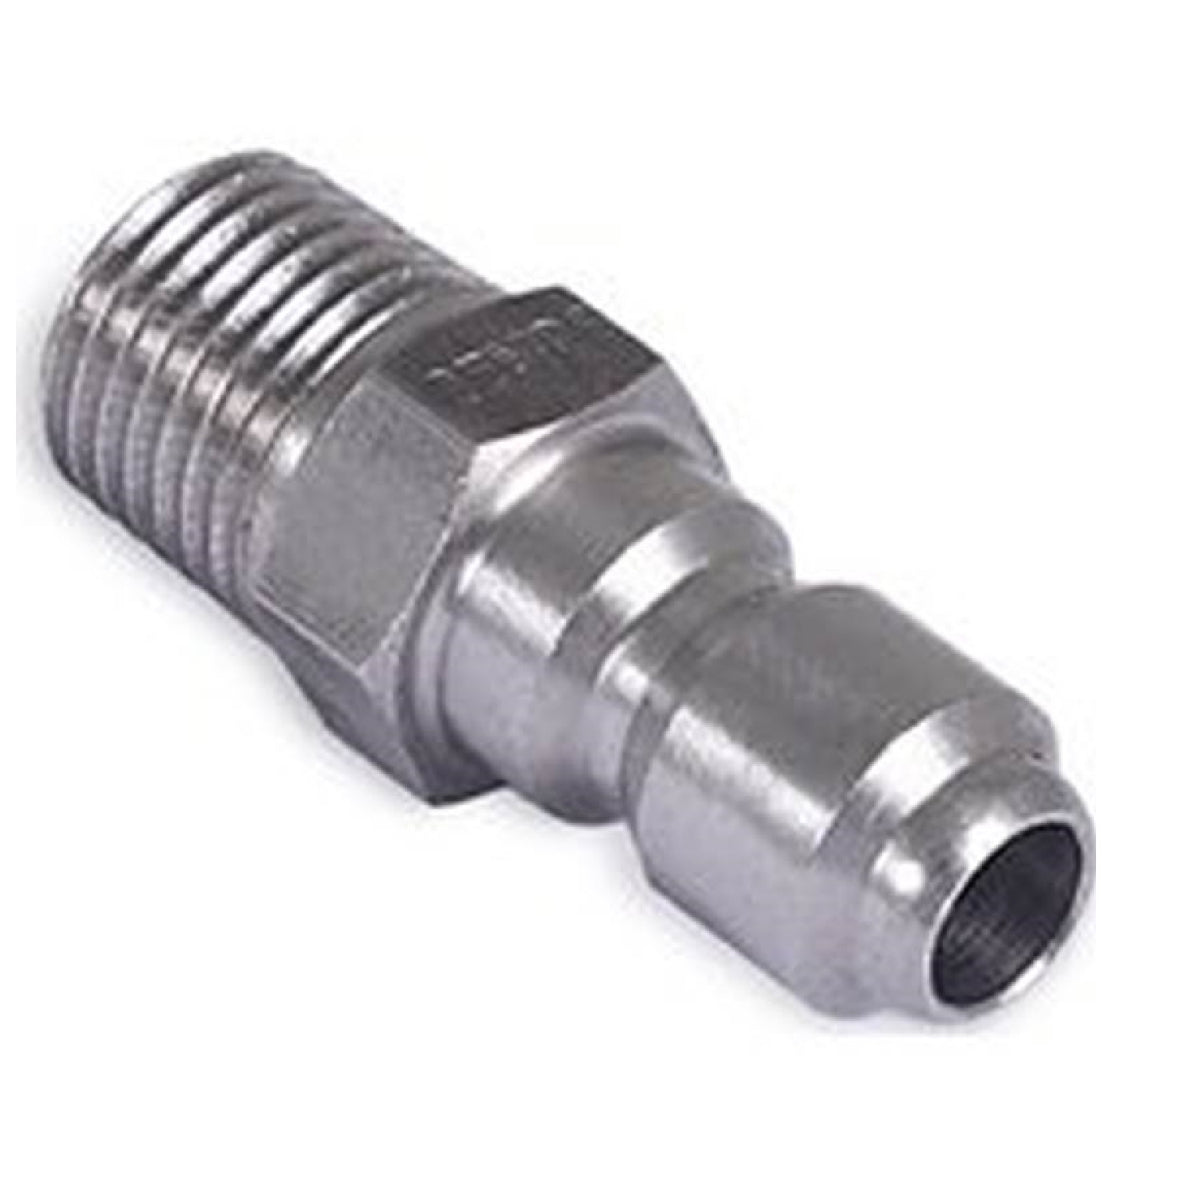 Mi-T-M AW-0017-0002 Quick Connect Plug, Stainless Steel